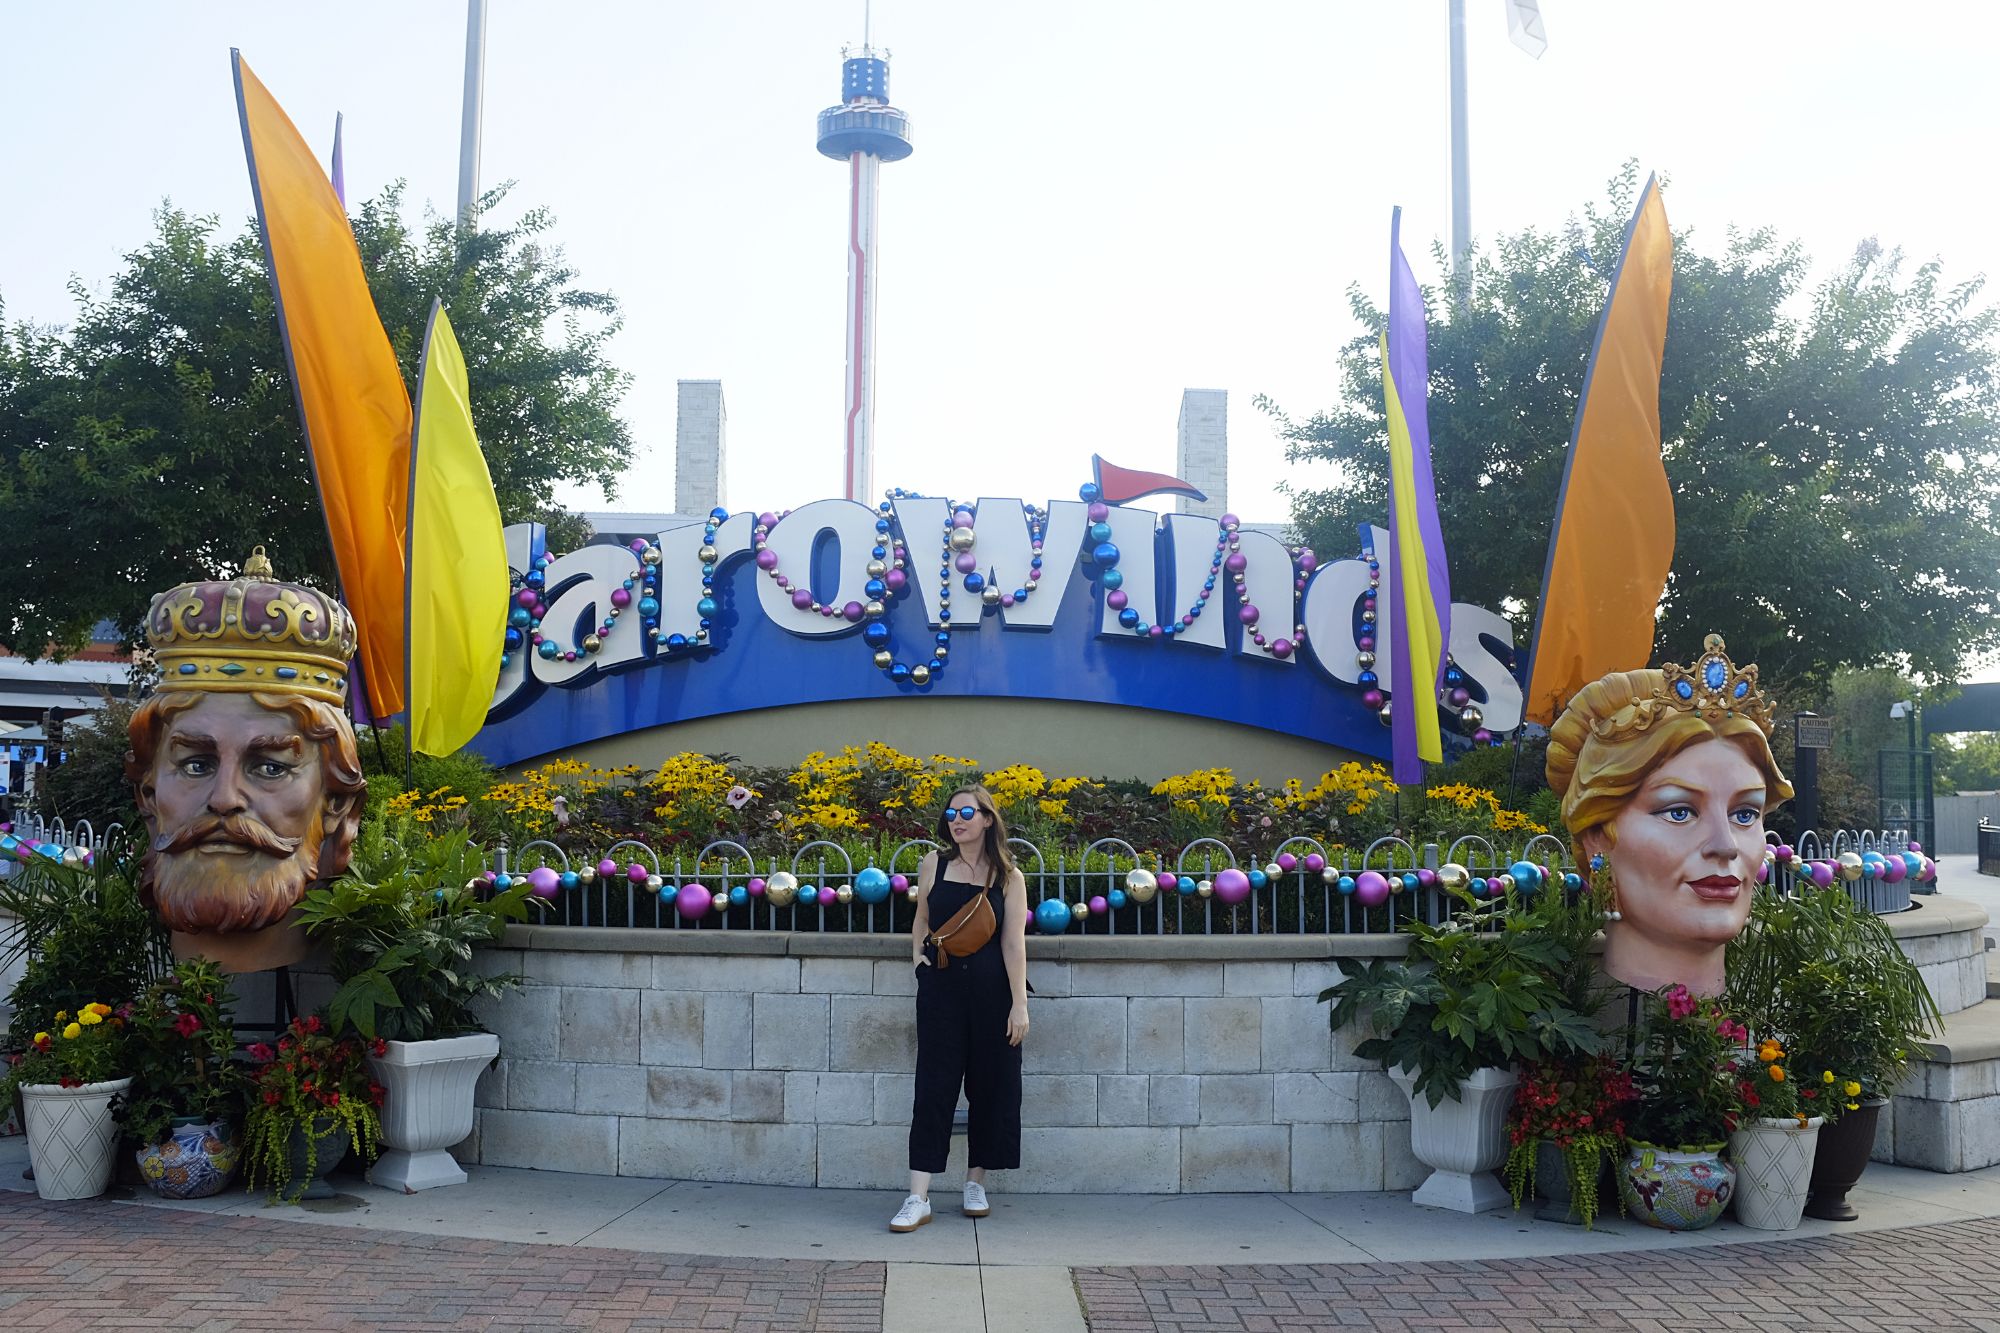 Alyssa stands in front of the Carowinds sign in a jumpsuit and sneakers